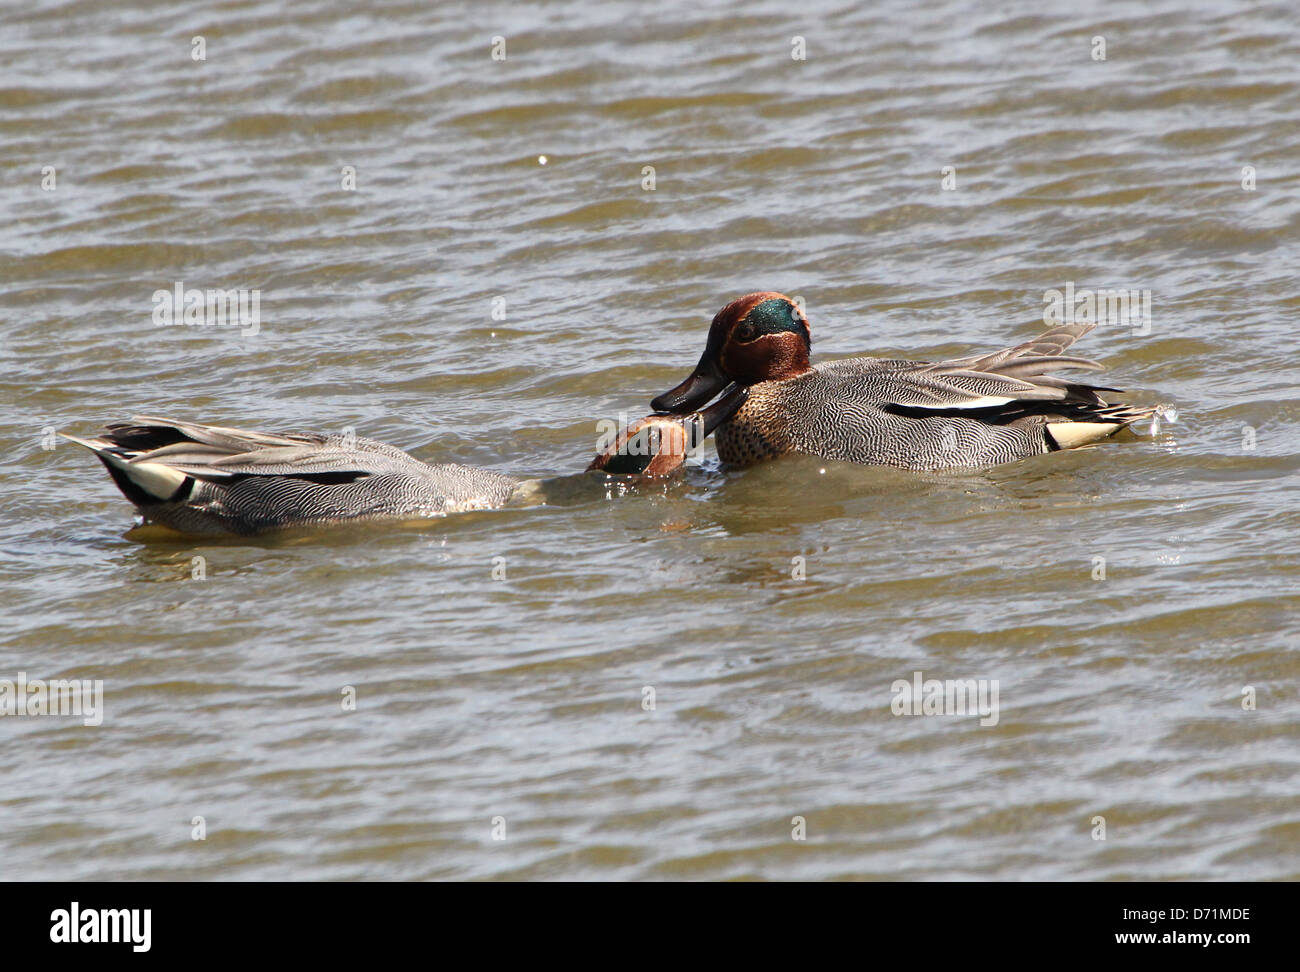 Mature male Common Teals (Anas crecca)  fighting and attacking Stock Photo